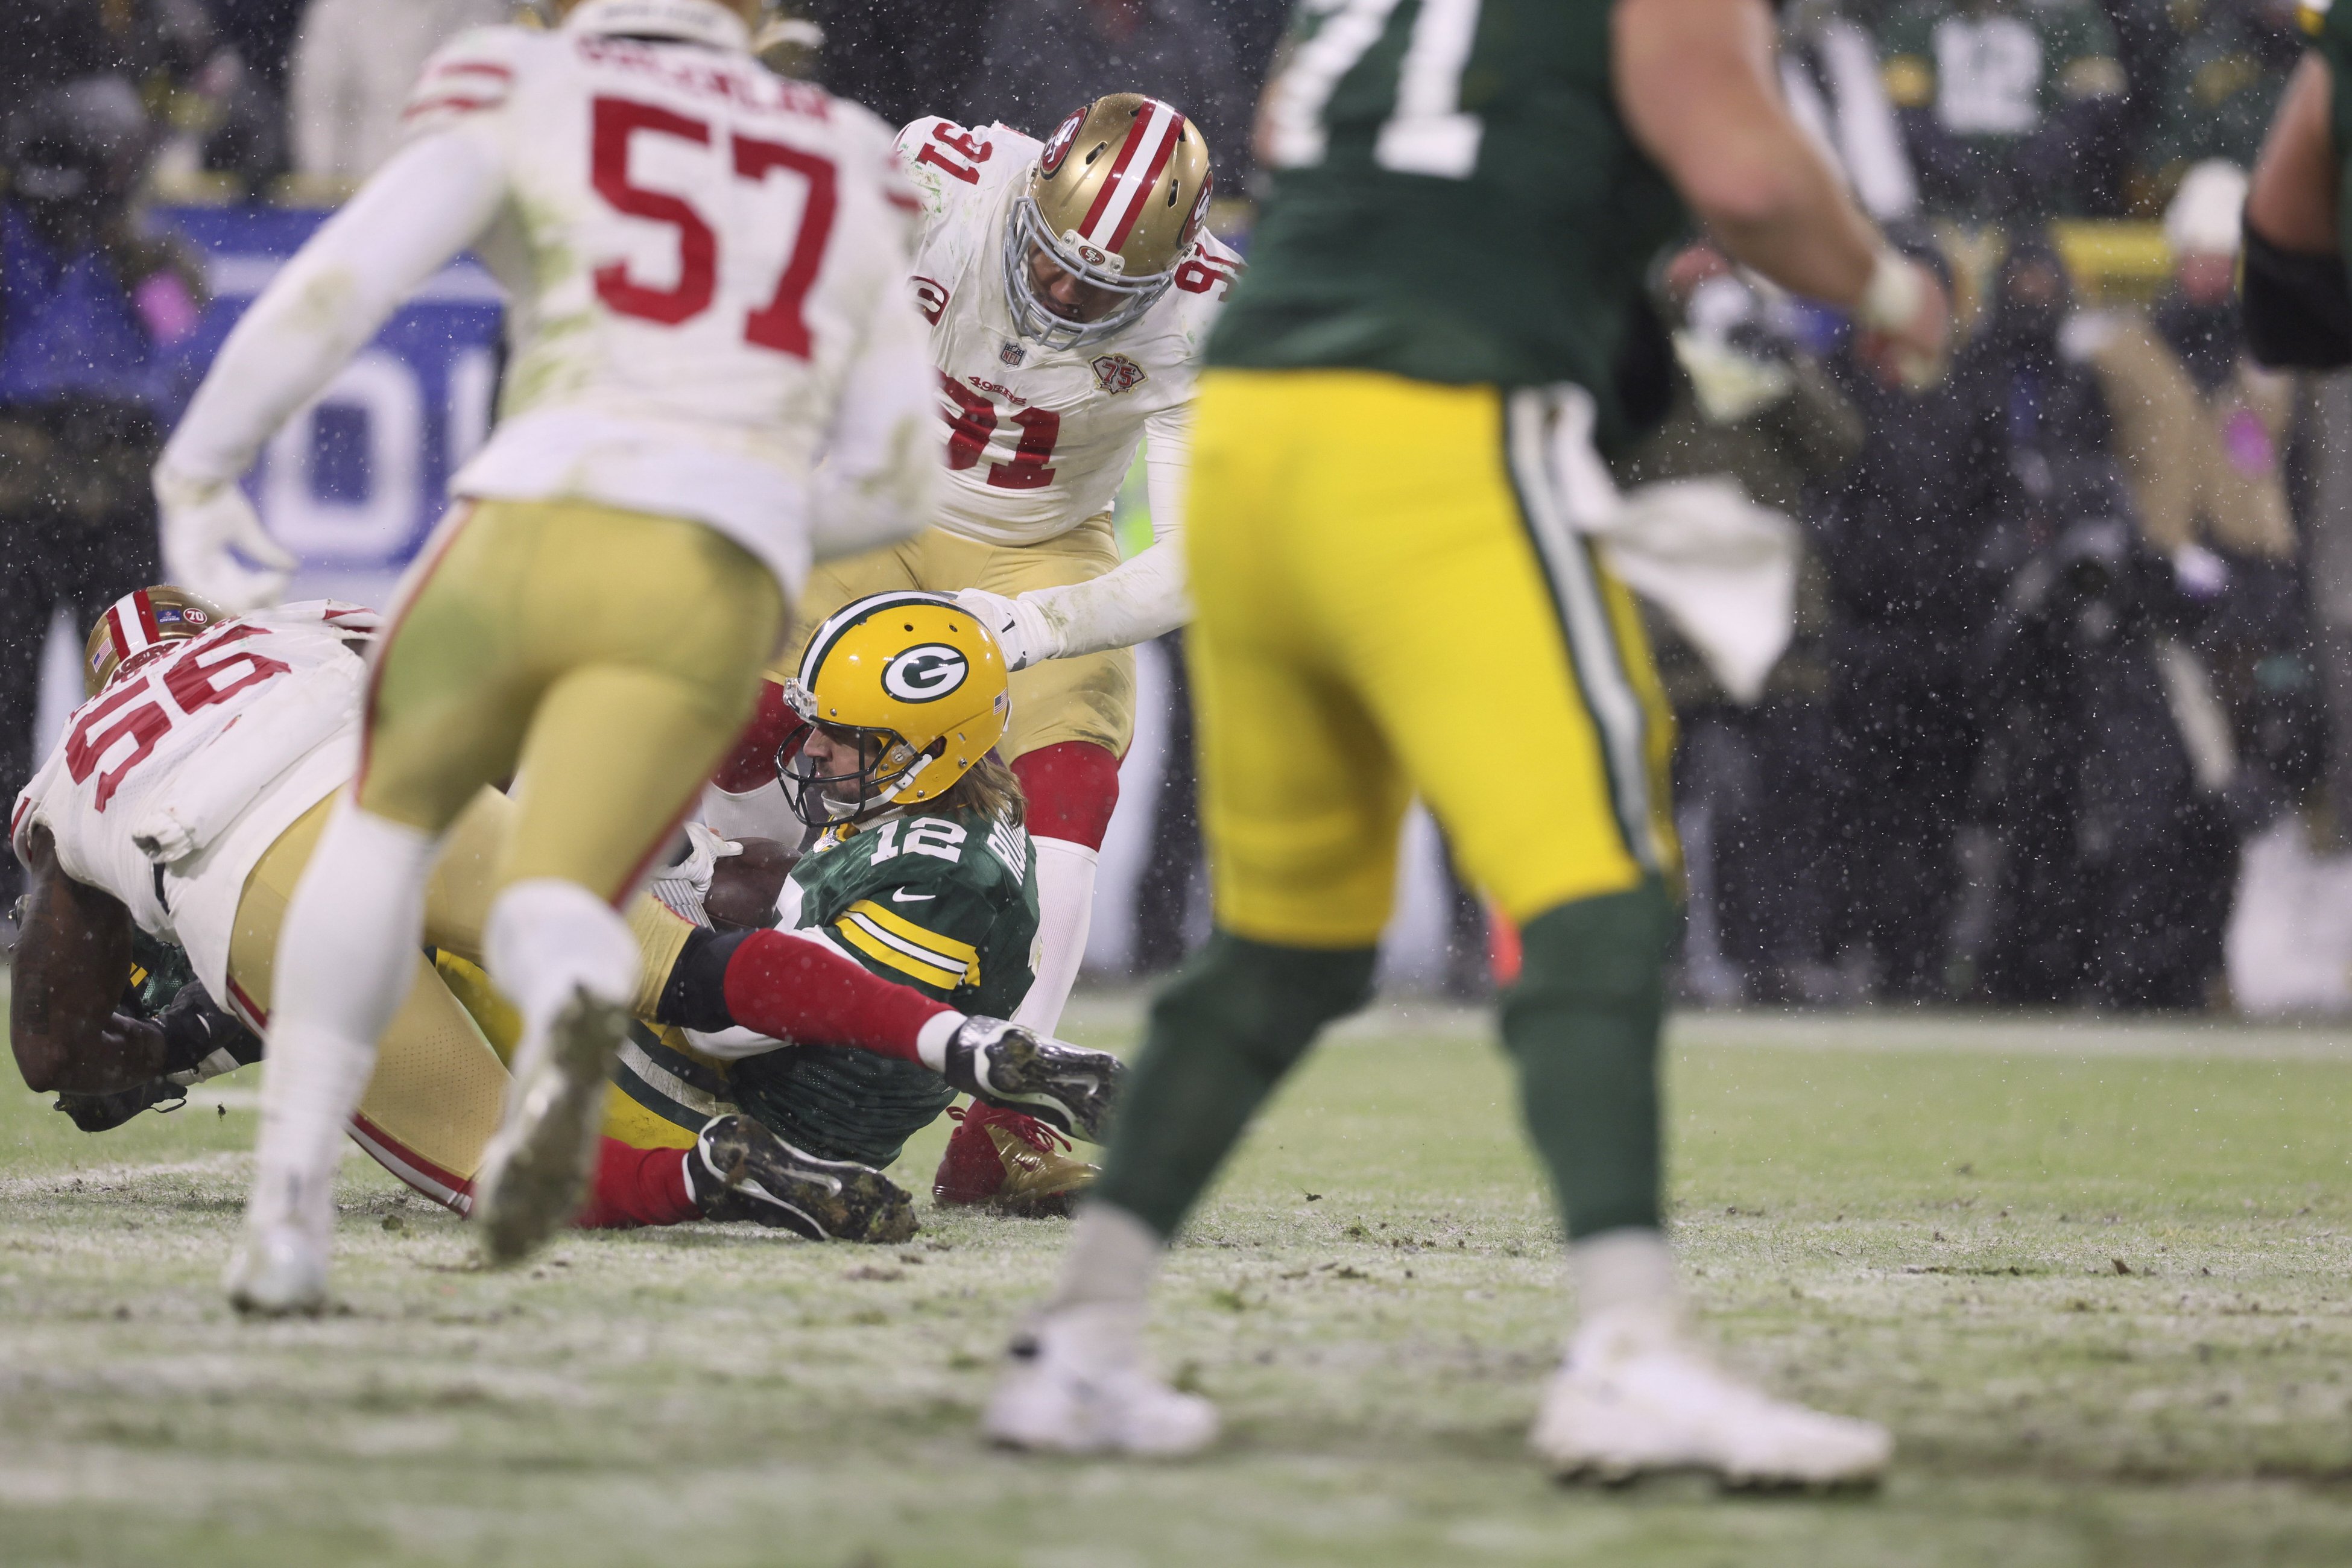 Members of the Green Bay Packers scramble to prevent members of the San Francisco 49ers from getting the football